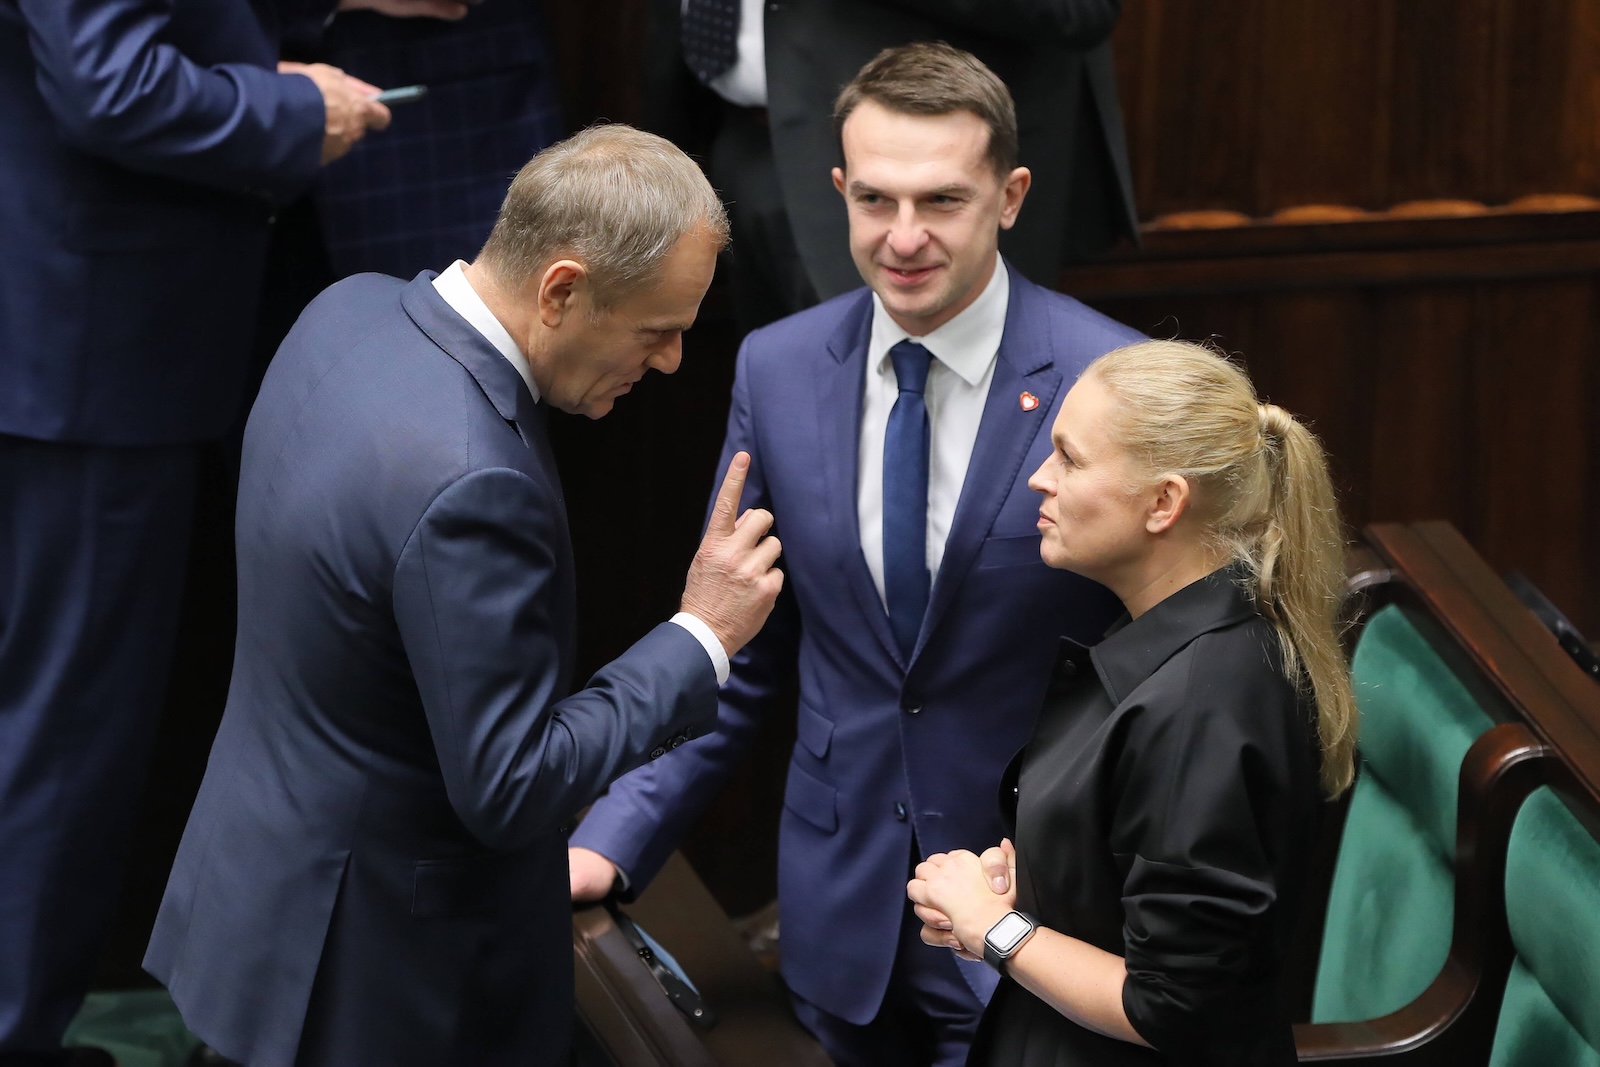 epa11022676 Civic Platform party (PO) leader Donald Tusk (L) talks to deputies Adam Szlapka (C) and Barbara Nowacka (R) at the Sejm hall, the lower house of the Polish parliament, in Warsaw, Poland, 11 December 2023. Prime Minister Morawiecki on 11 December will present the agenda of the Council of Ministers with a motion for a vote of confidence. According to the Sejm website, the vote of confidence in Mateusz Morawiecki's government will be followed by a one and a half hour break, during which candidacies for the so-called Prime Minister will be submitted. A candidate for prime minister can be proposed by a group of at least 46 MPs.  EPA/PAWEL SUPERNAK POLAND OUT